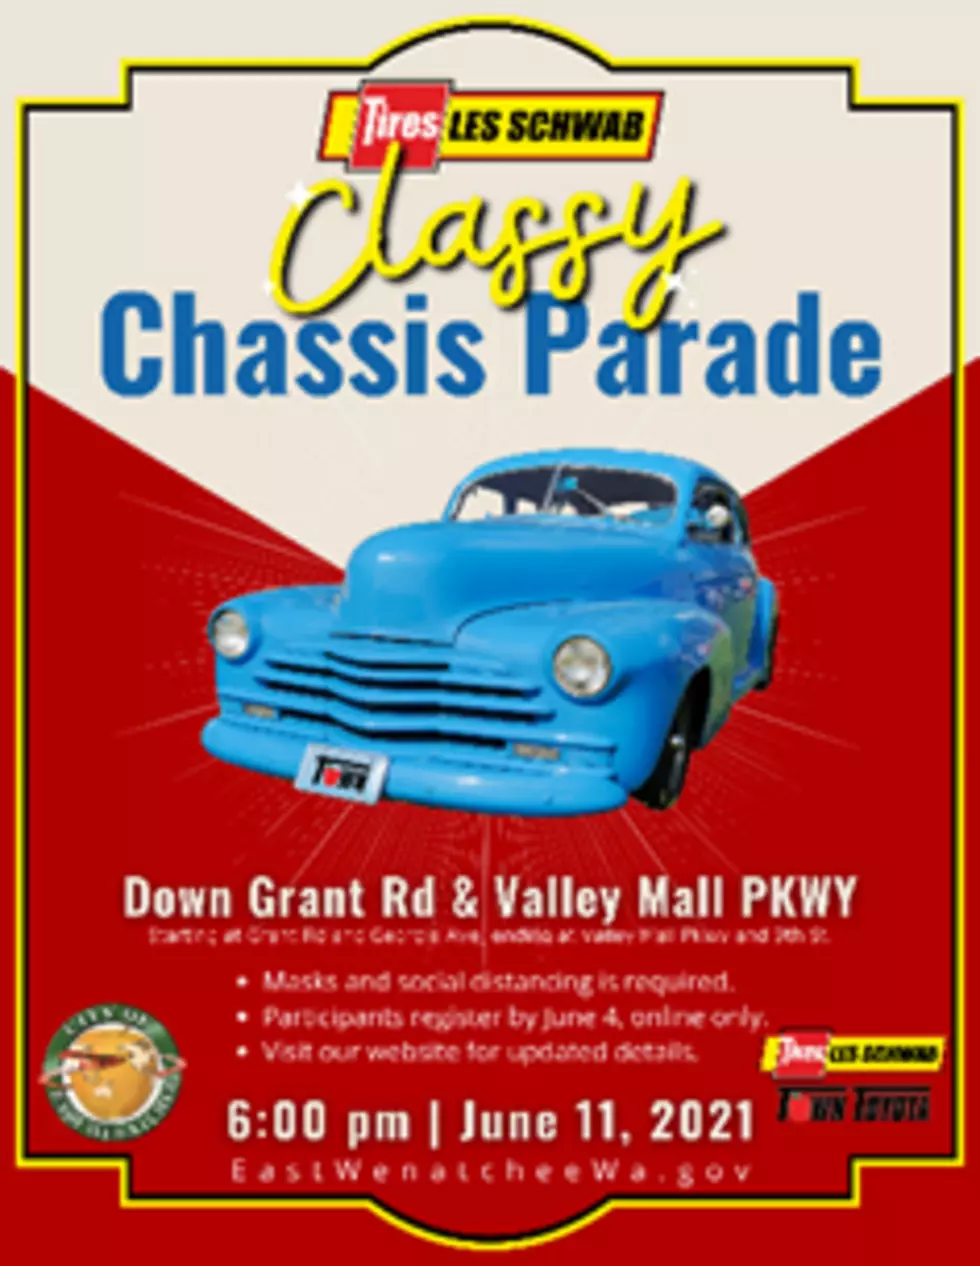 East Wenatchee Tradition, Classy Chassis Parade, is Revived for 2021